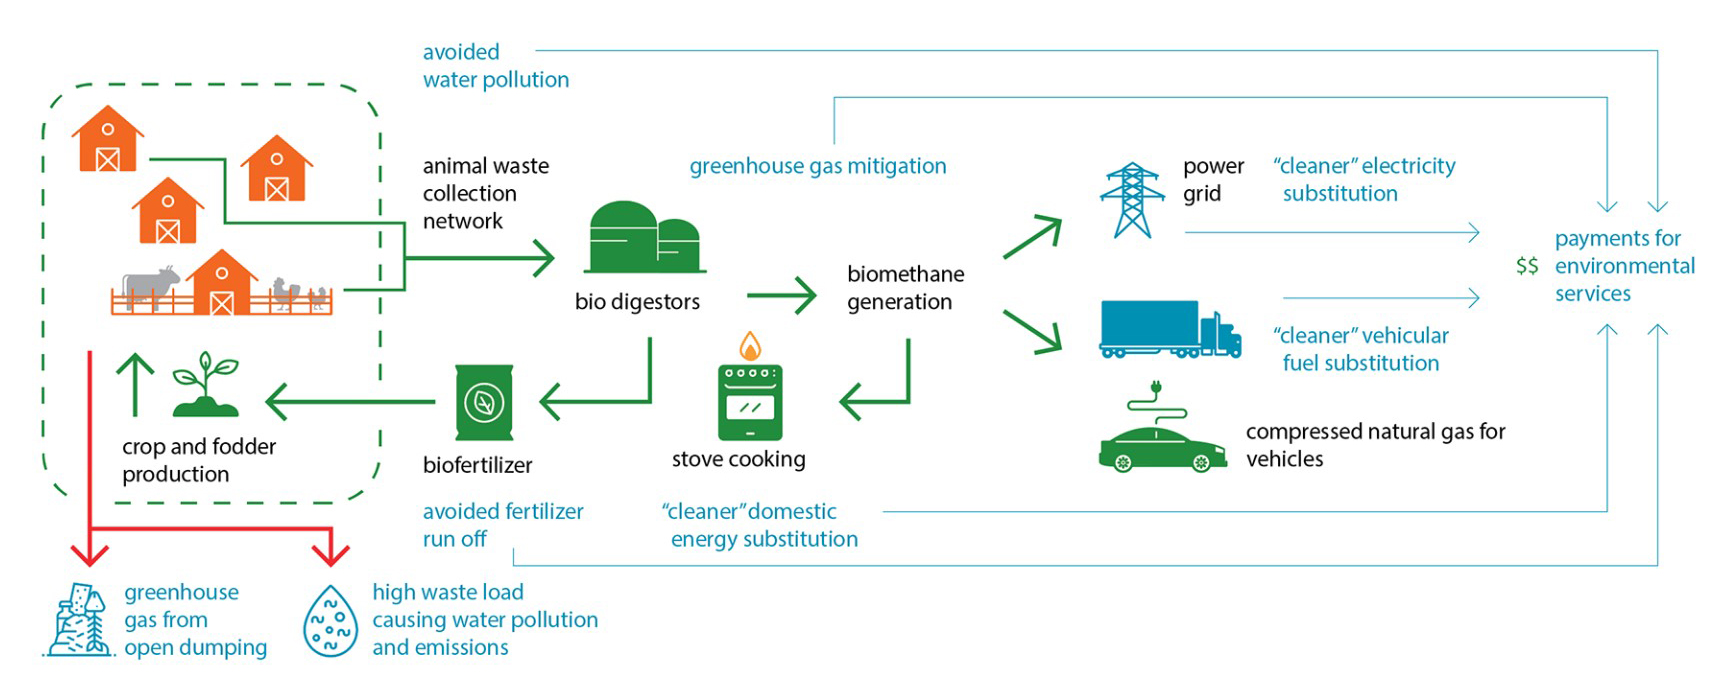 Graphic showing waste system